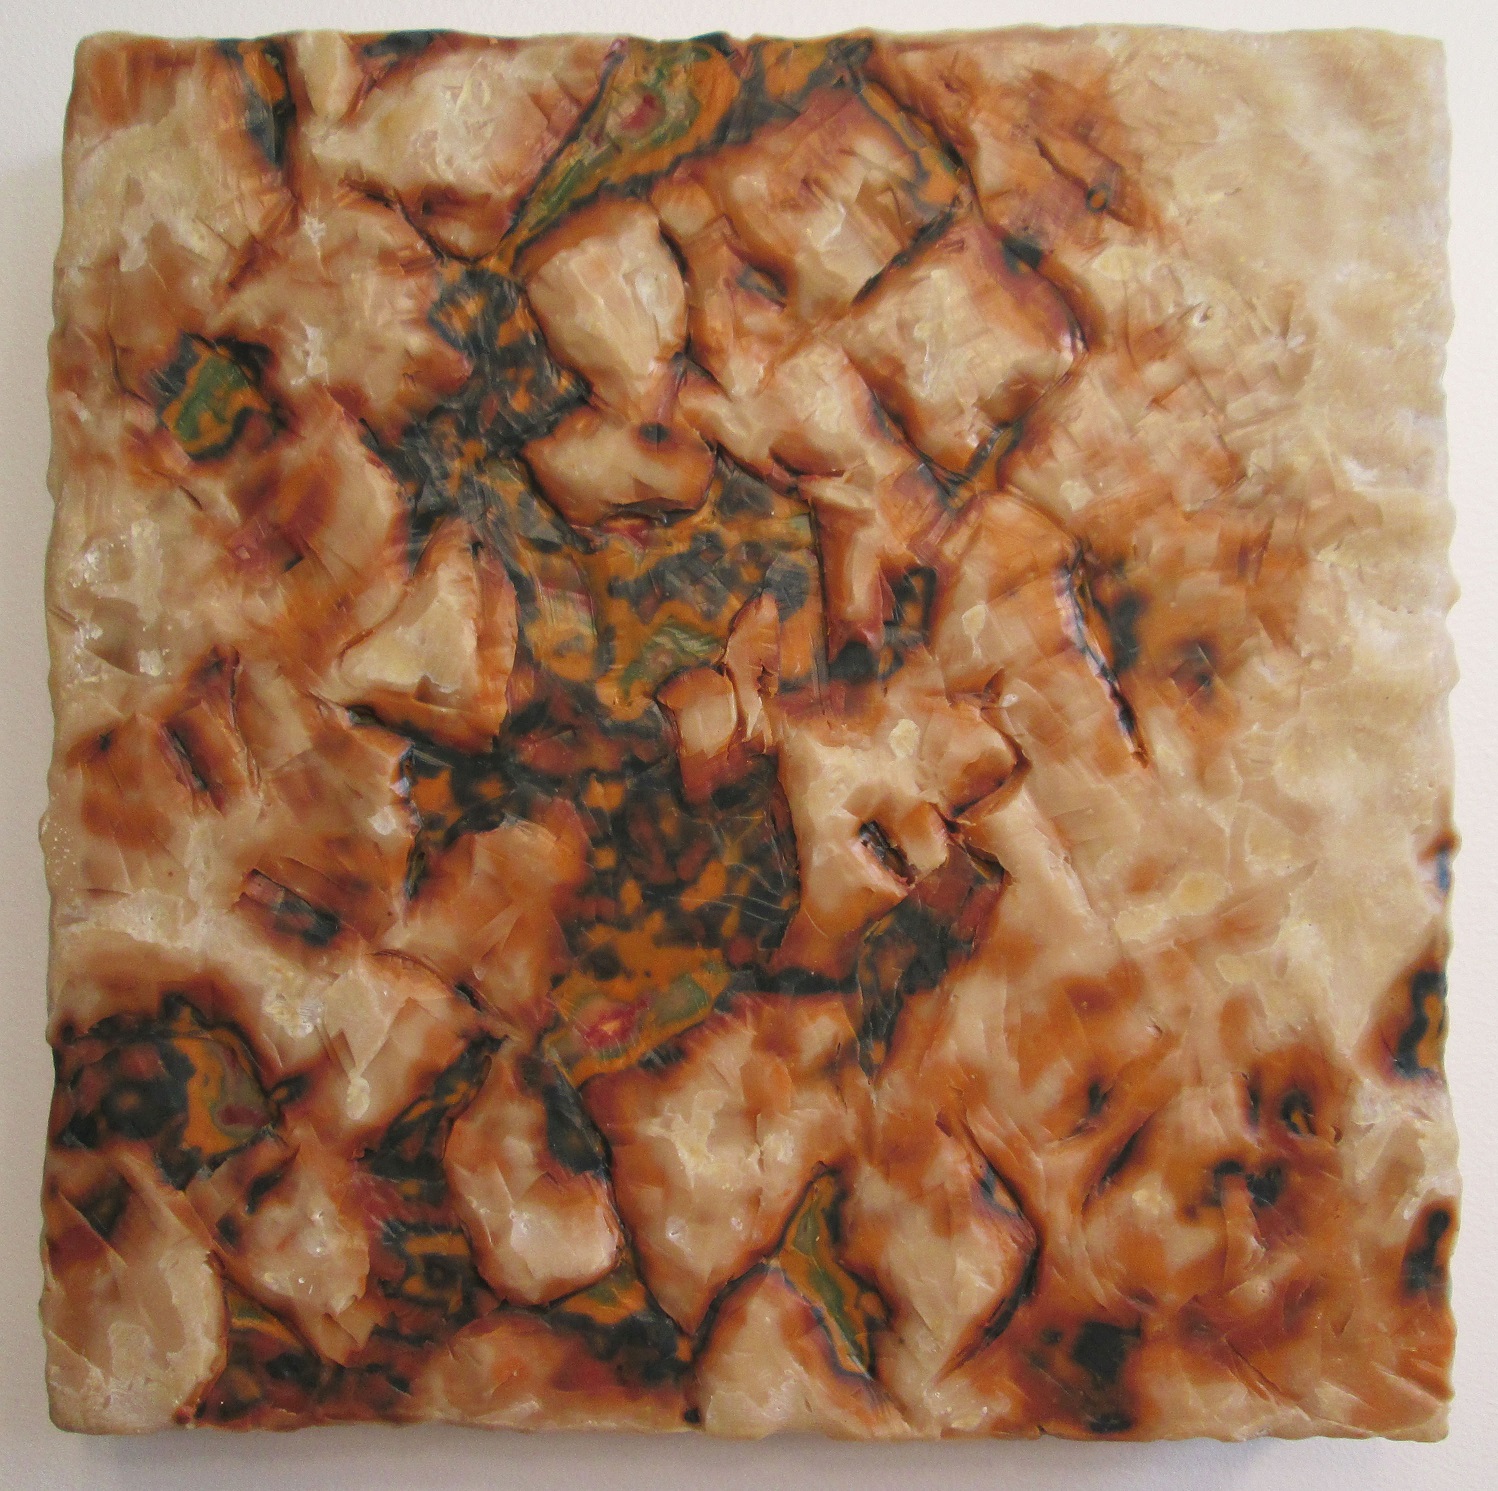 Excavation #5; Layered and carved encaustic with oils on wooden panel; 12"h x 12"w x 2.25"d; 2001